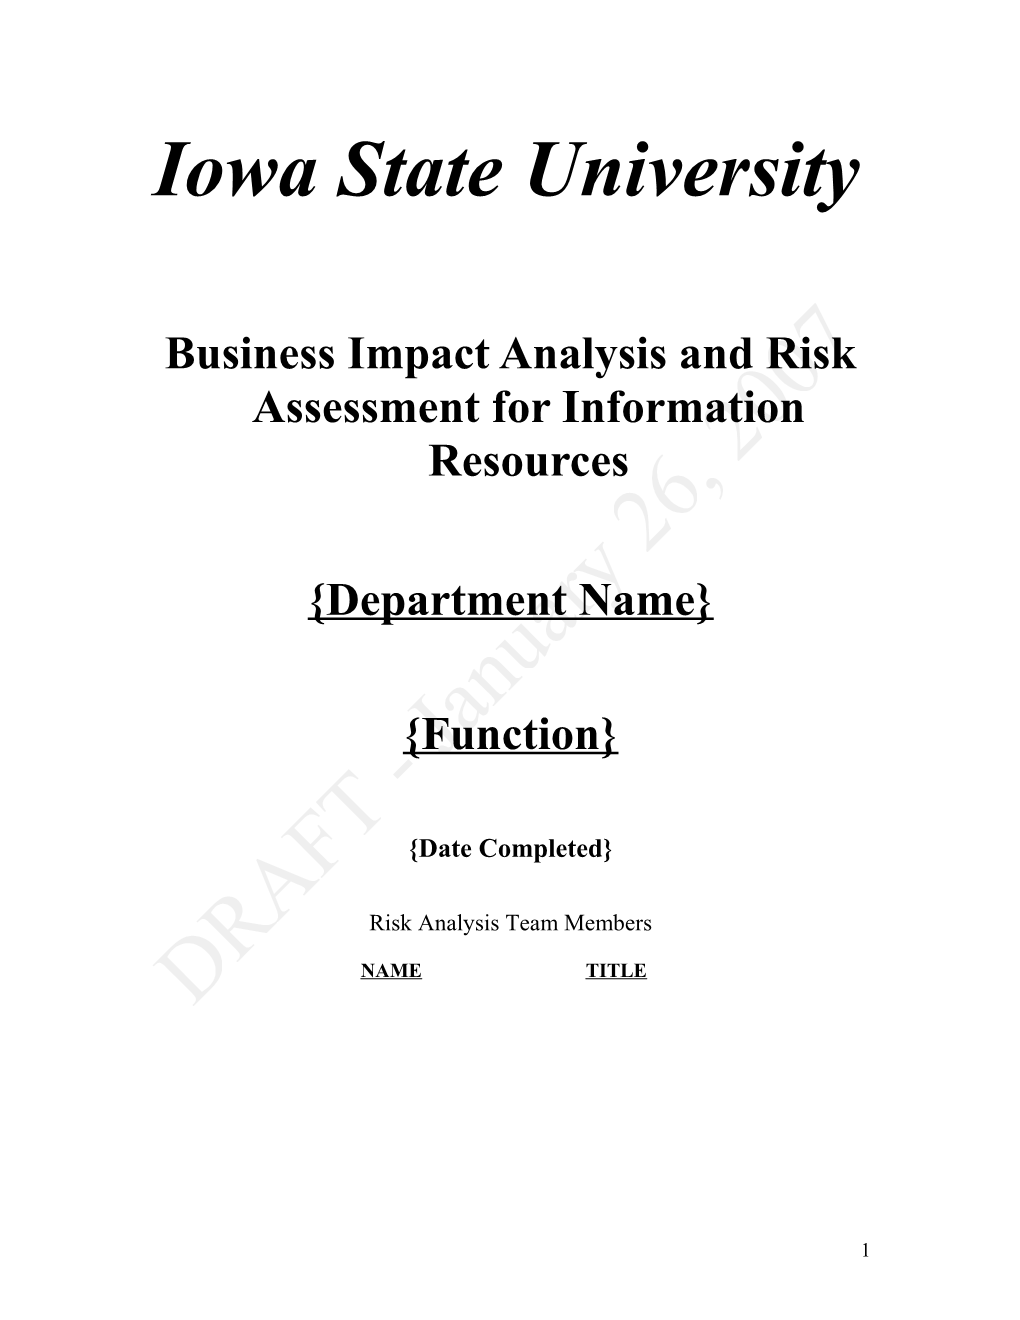 Business Impact Analysis and Risk Assessment for Information Resources